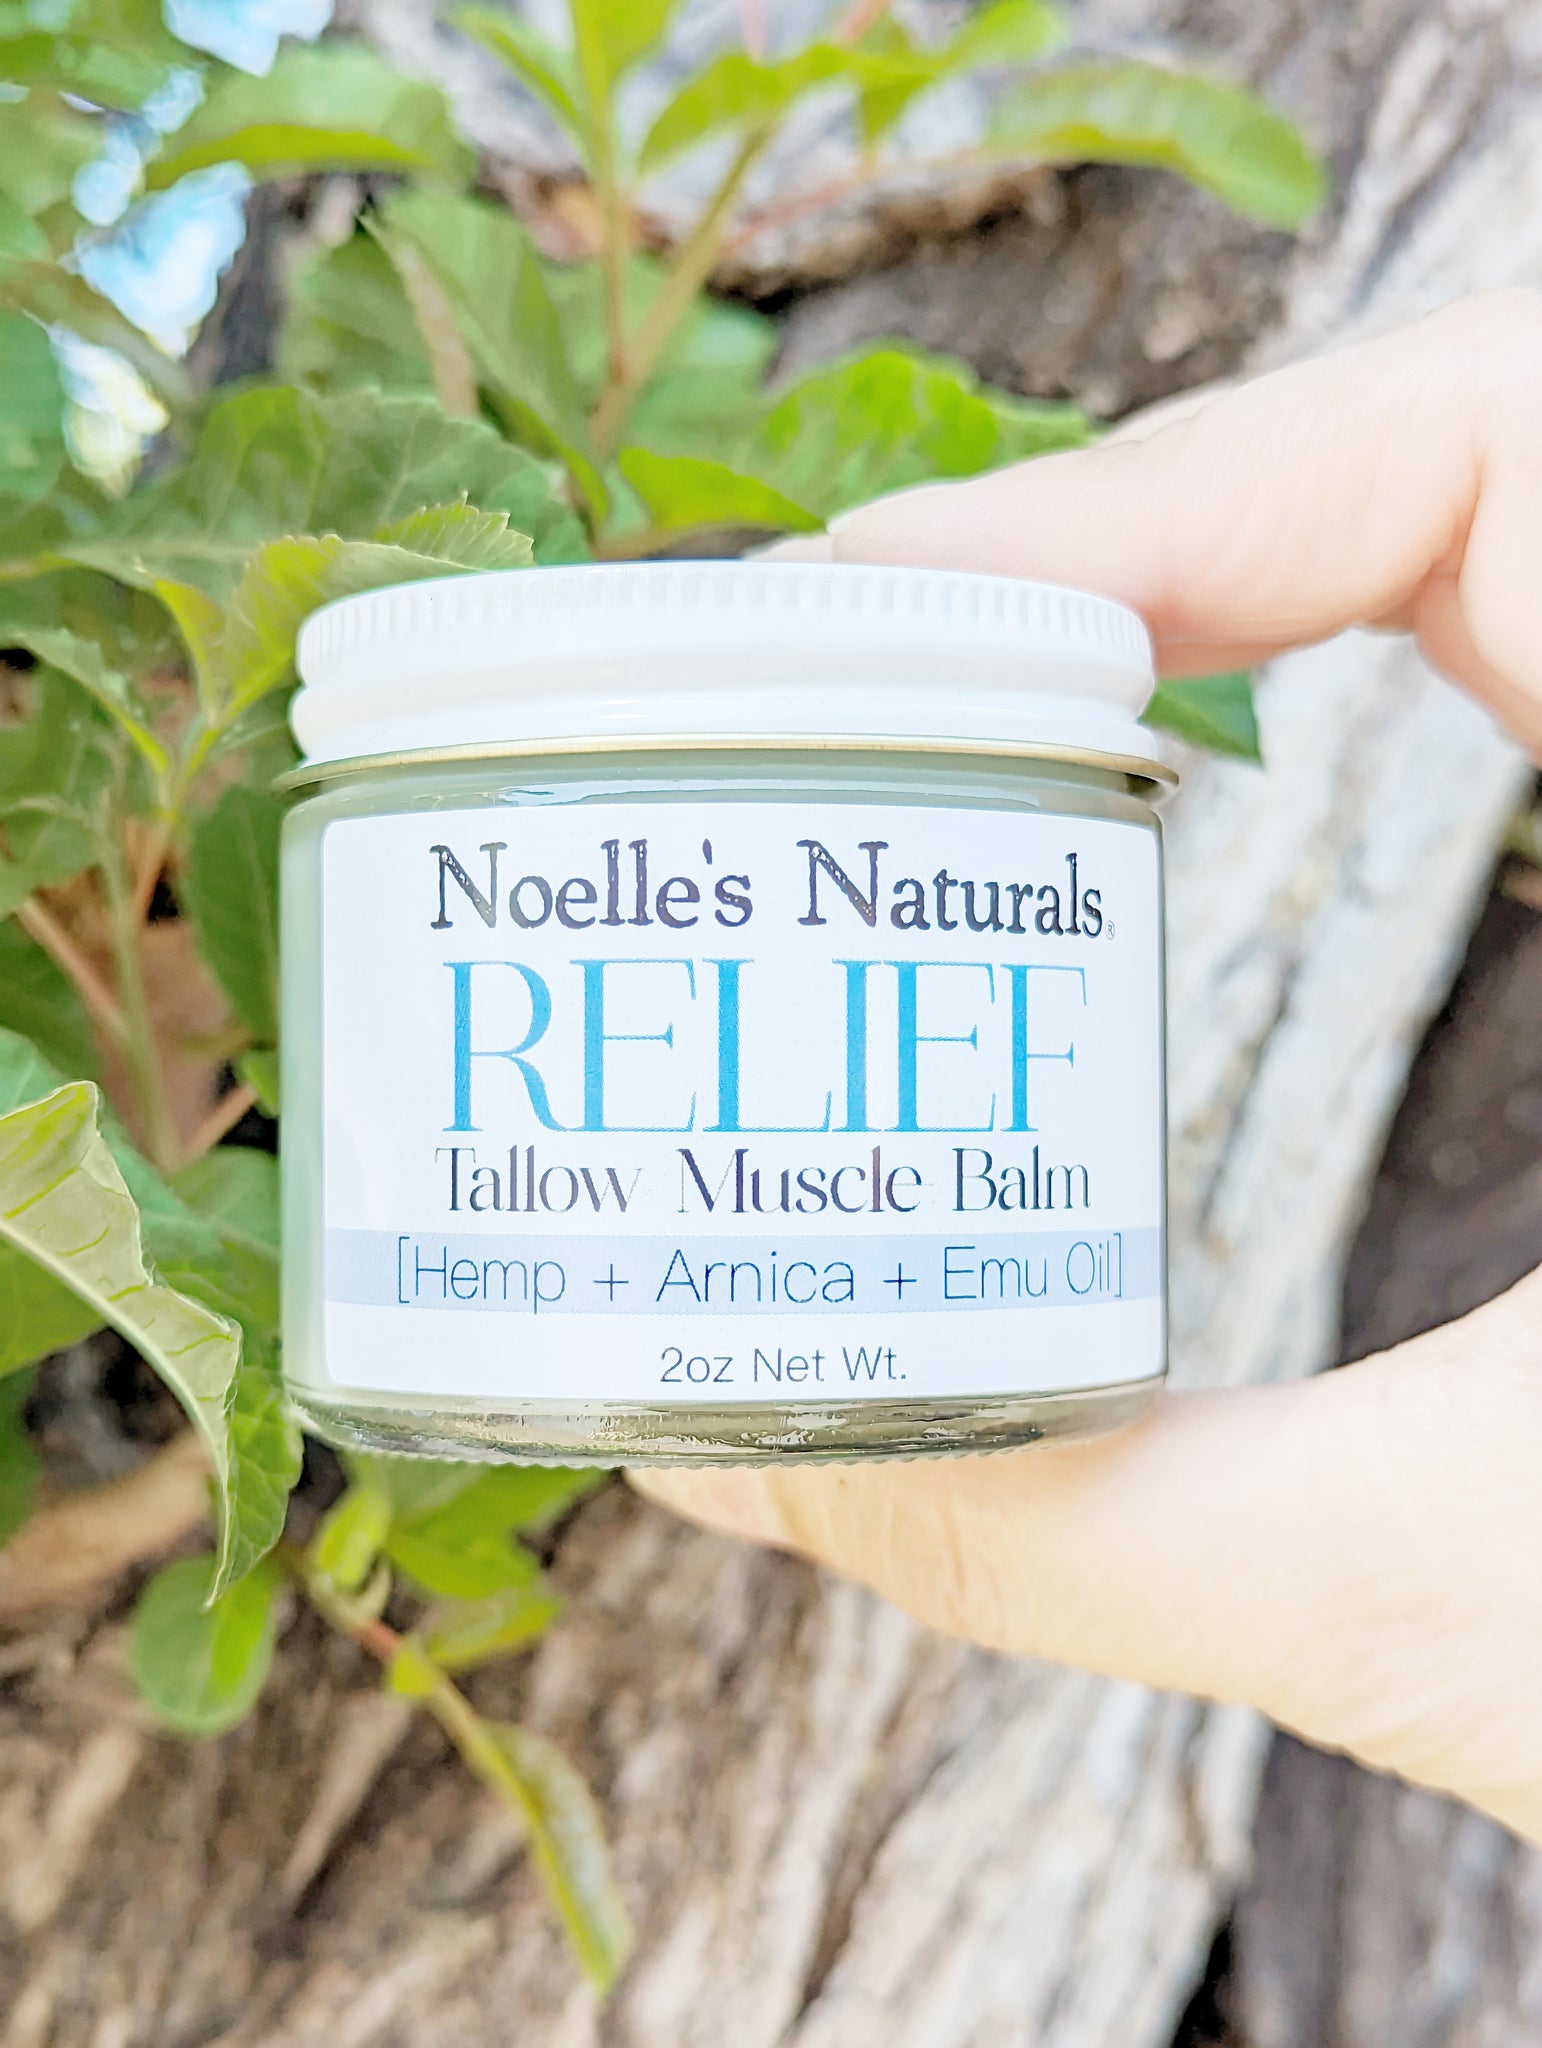 Relief Tallow Balm - soothes achy muscles and joints while moisturizing and soothing skin. Can also be used topically as a natural cough suppressant!